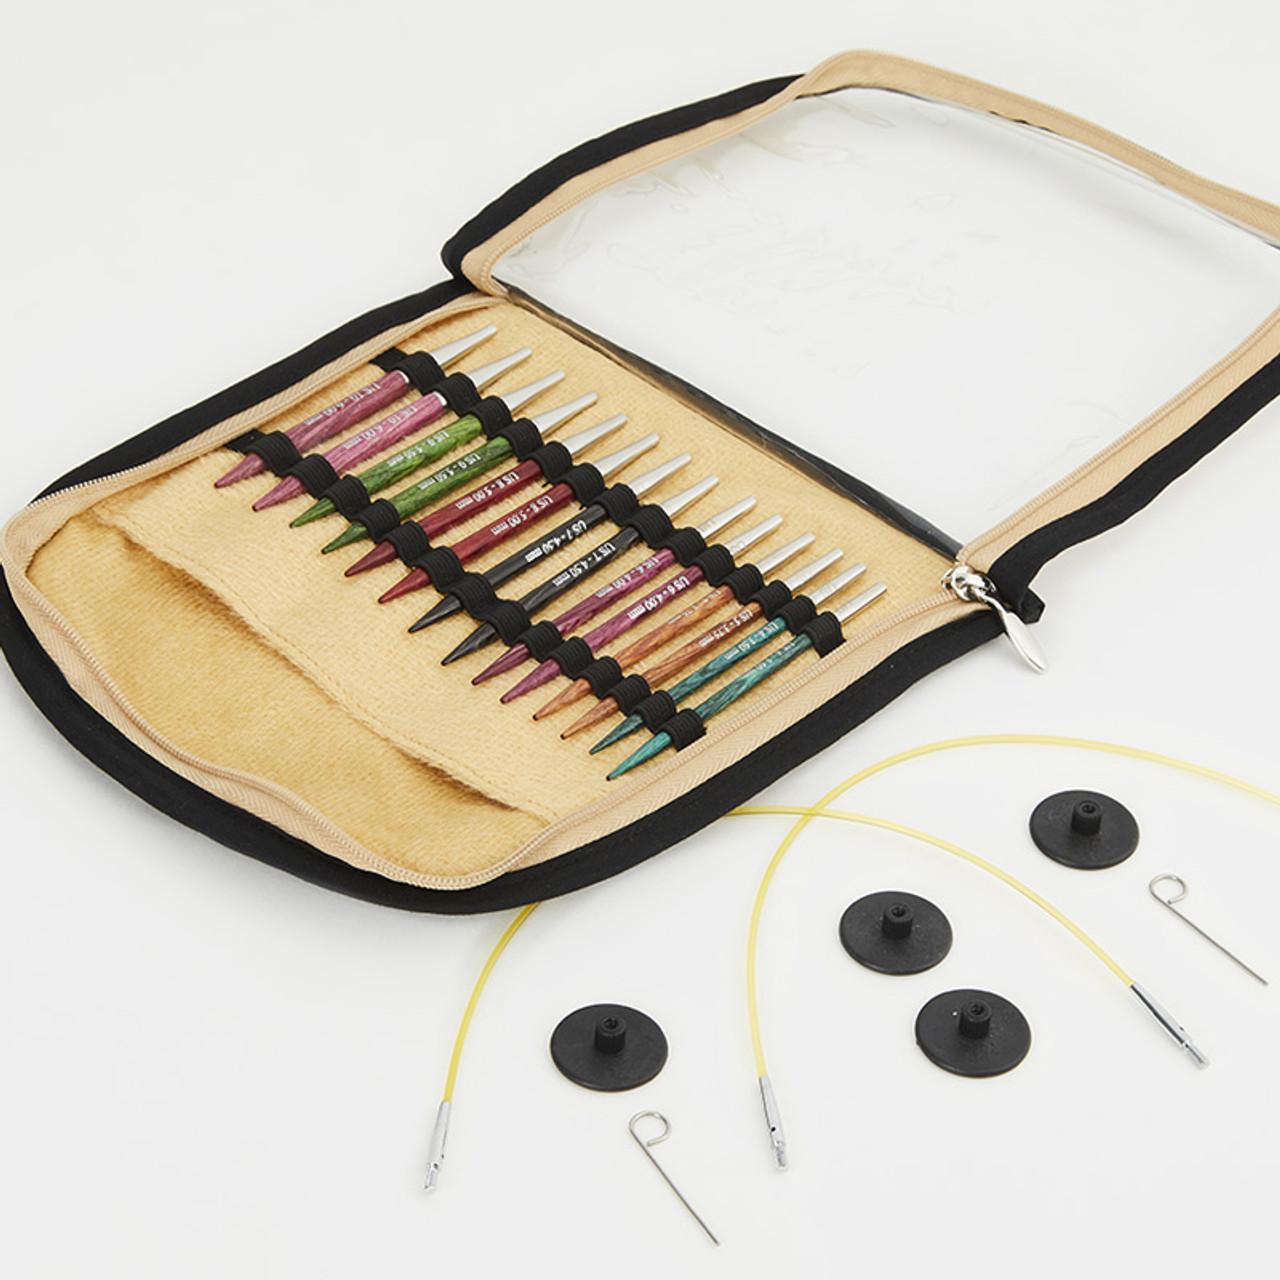 Knitter's Pride Interchangeable Circular Needle Sets — My Sister Knits